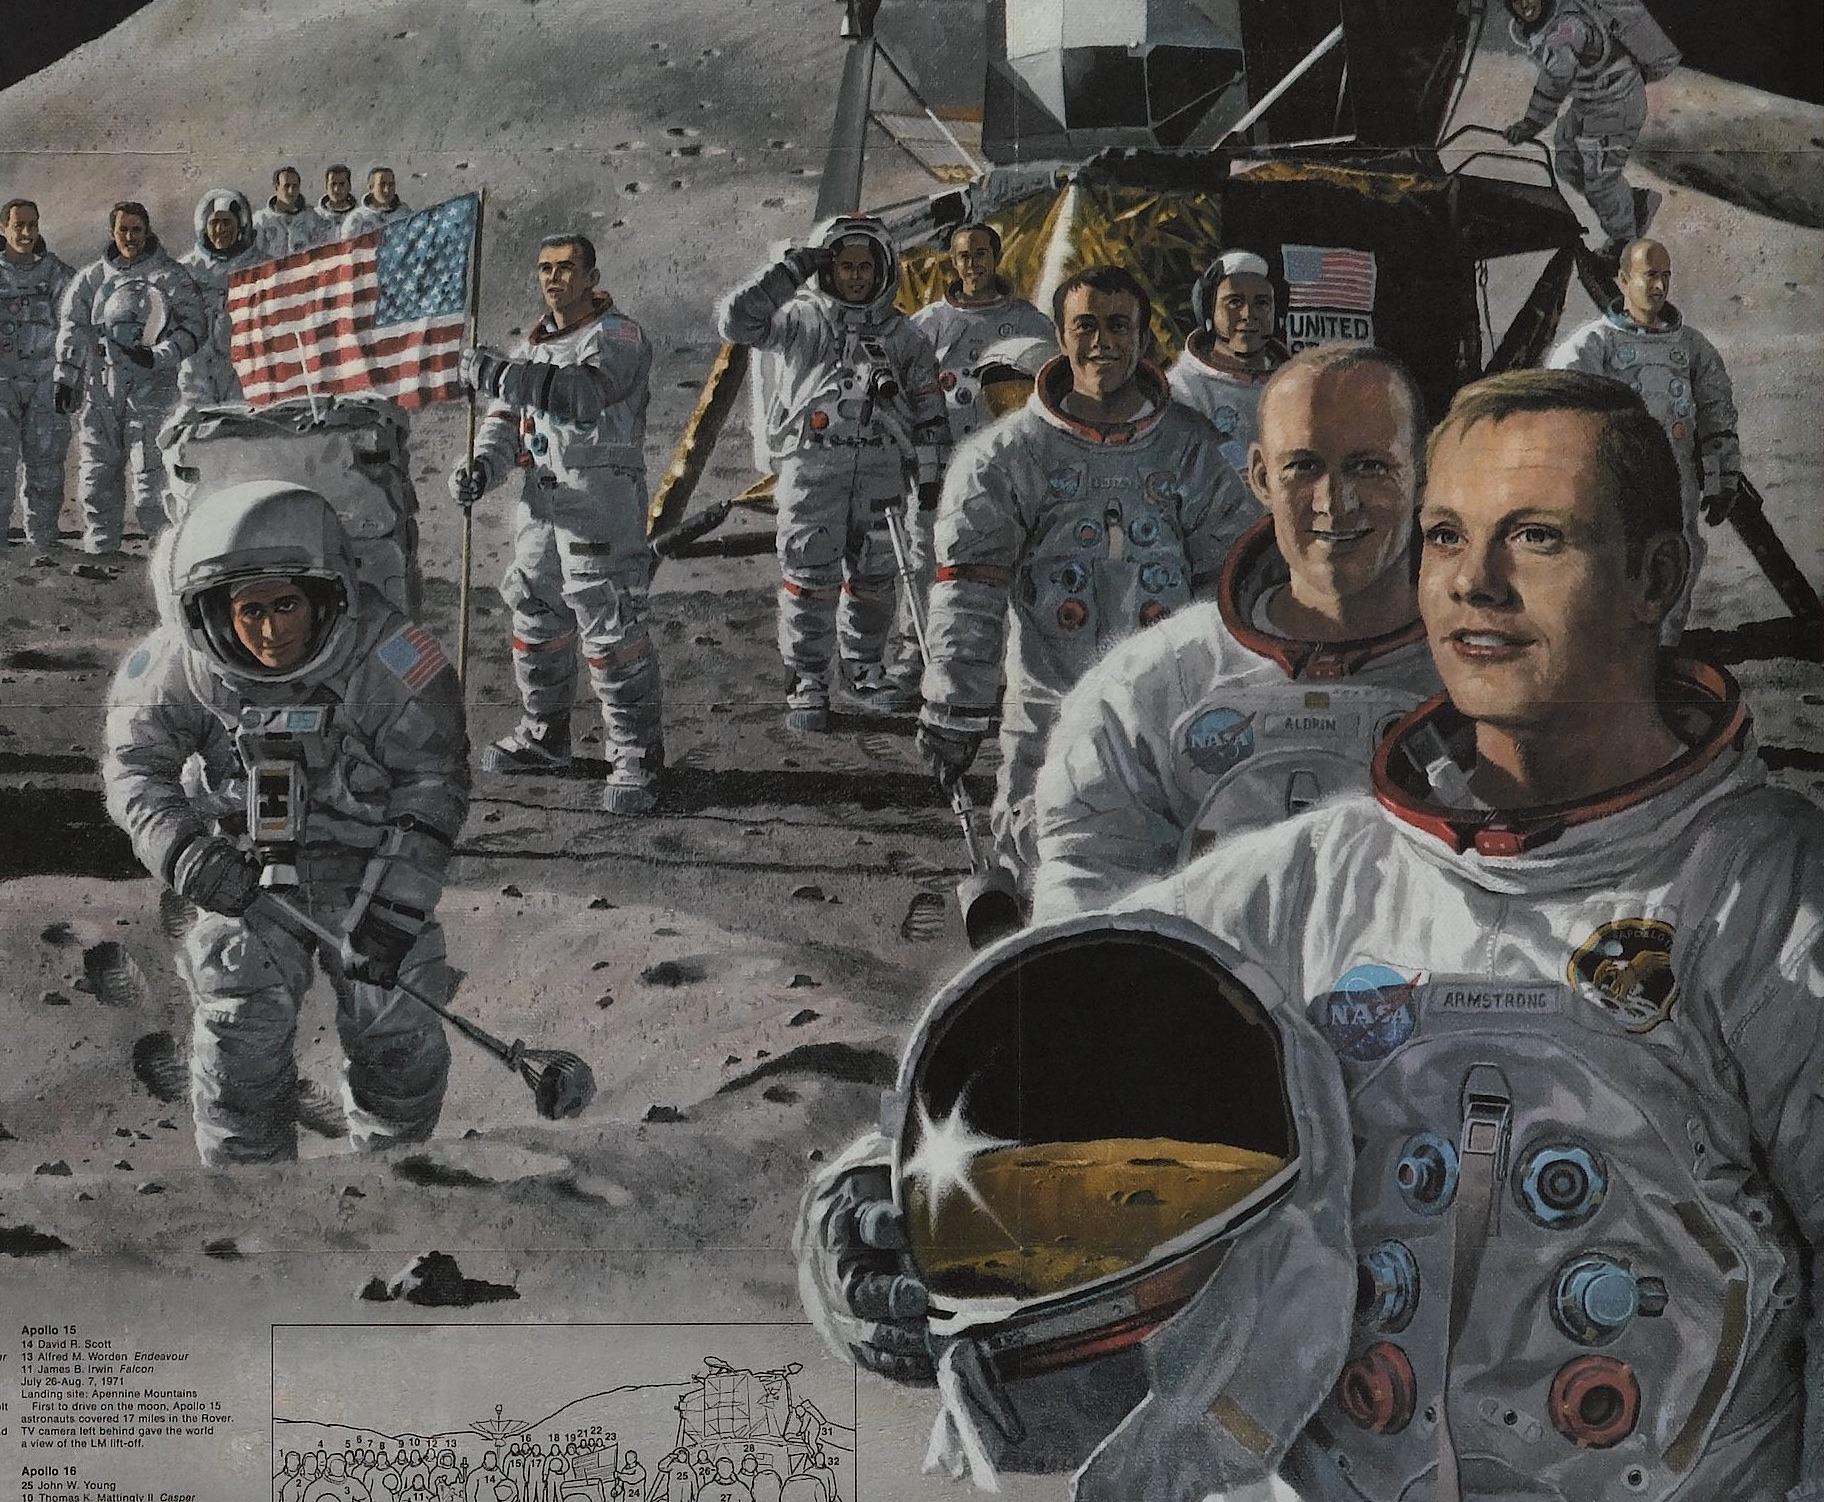 Presented is an original poster from a 1973 issue of National Geographic magazine, celebrating the historic Apollo missions from the first Apollo test crew through Apollo 17. Titled 